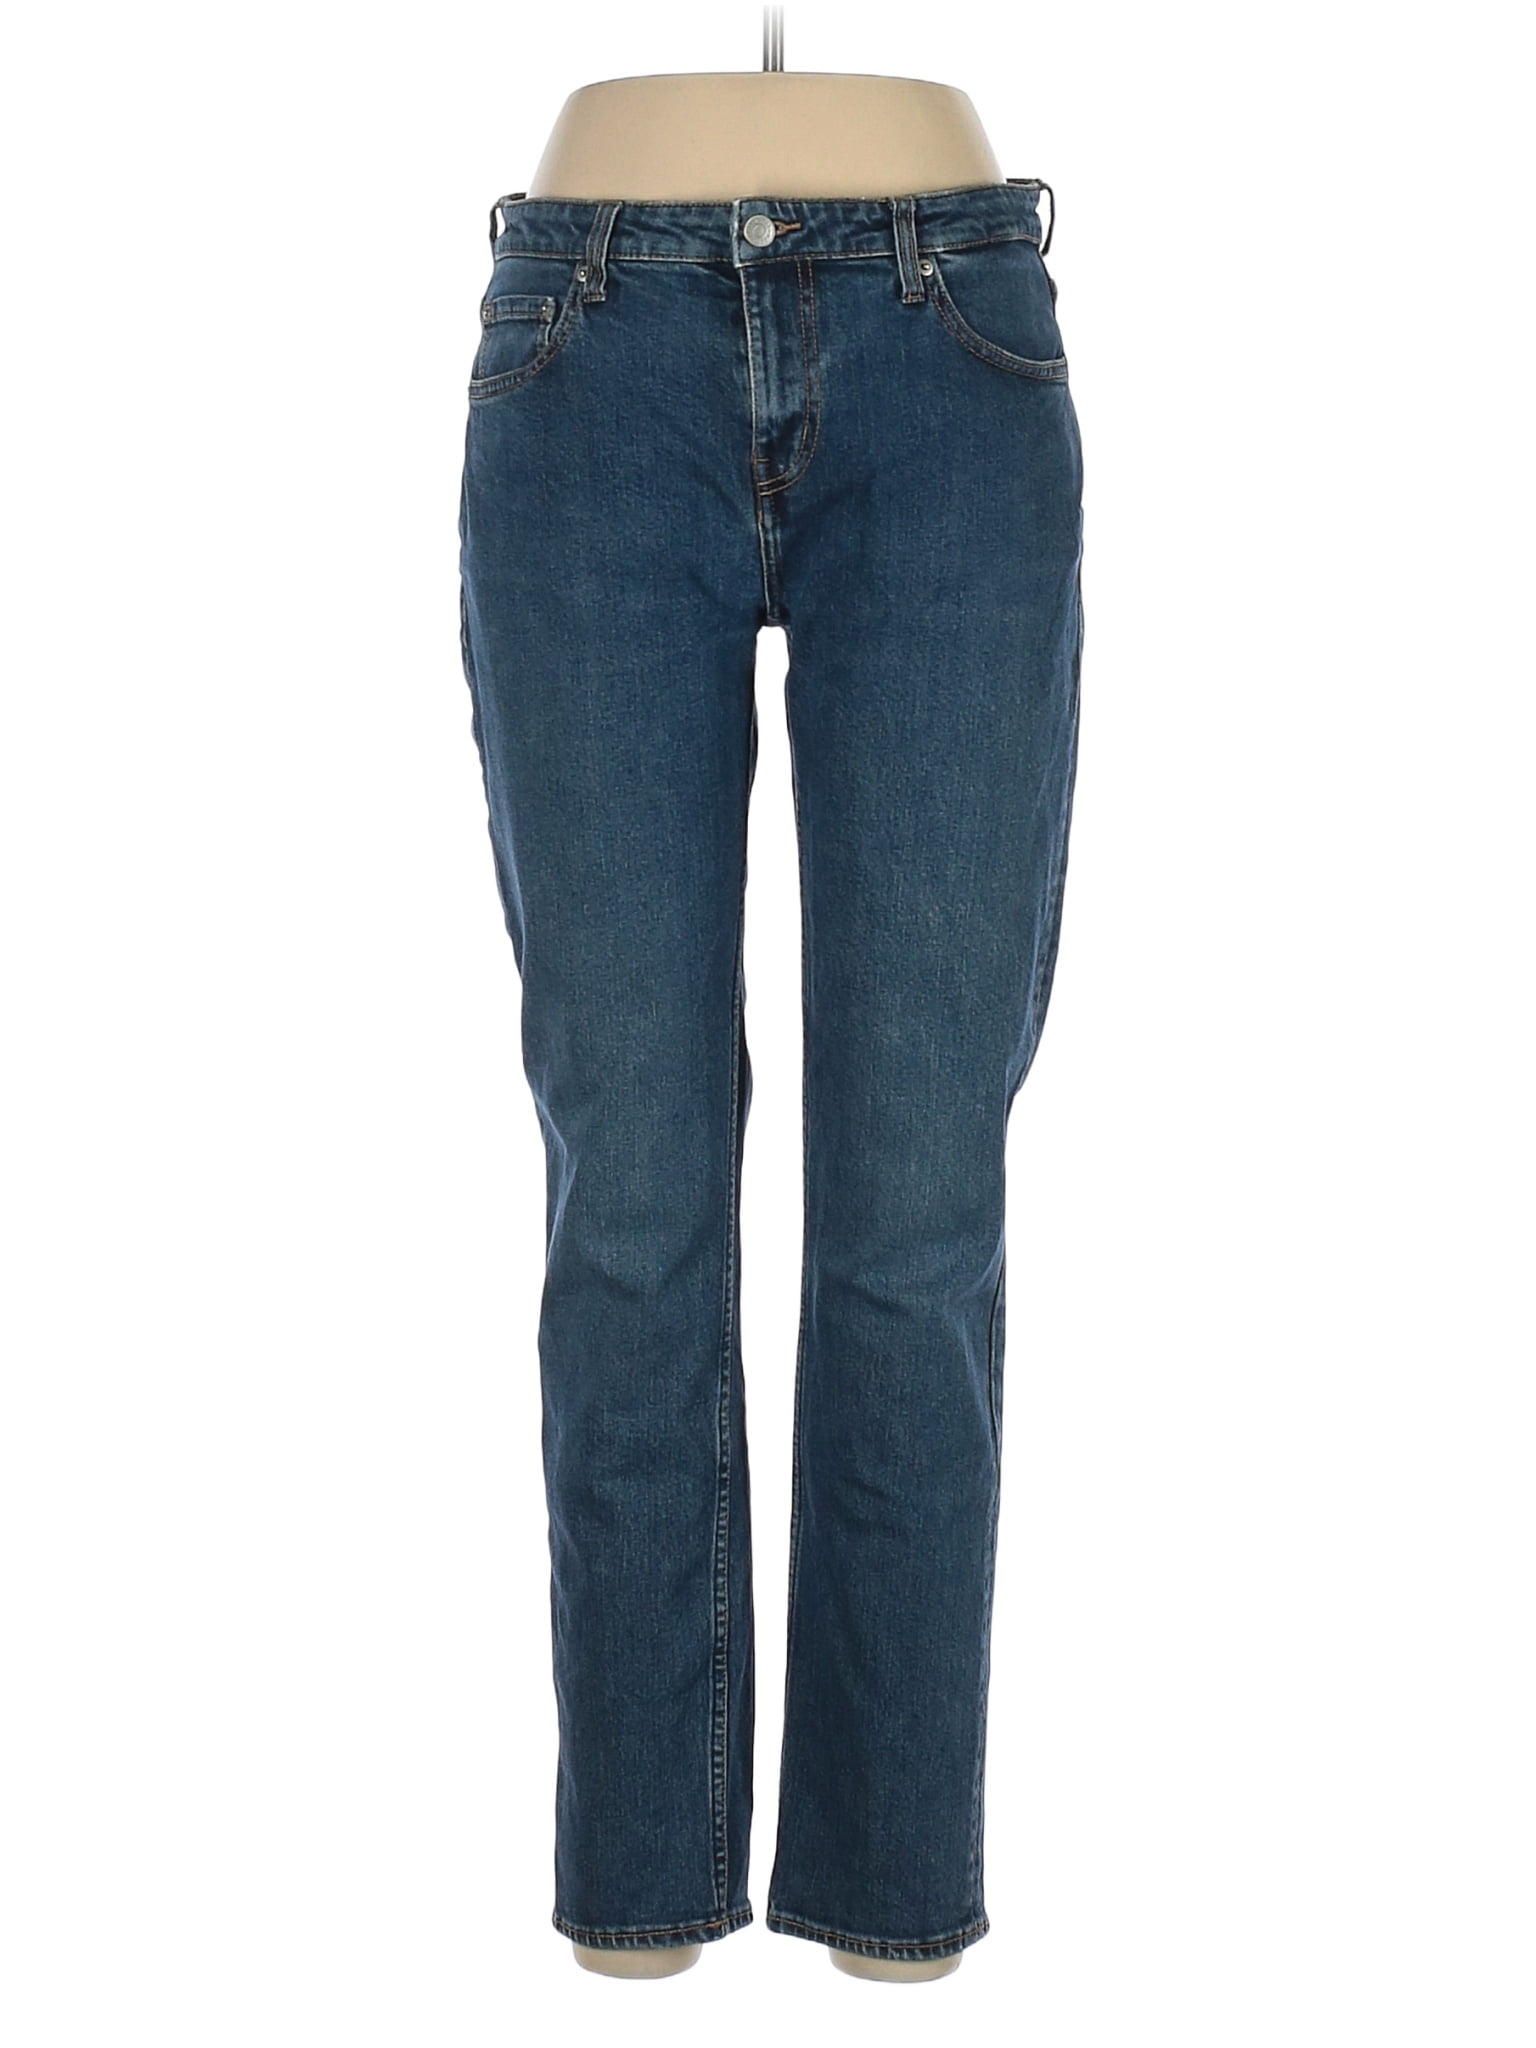 Happening Excel vand MTWTFSS Weekday Women's Jeans On Sale Up To 90% Off Retail | thredUP